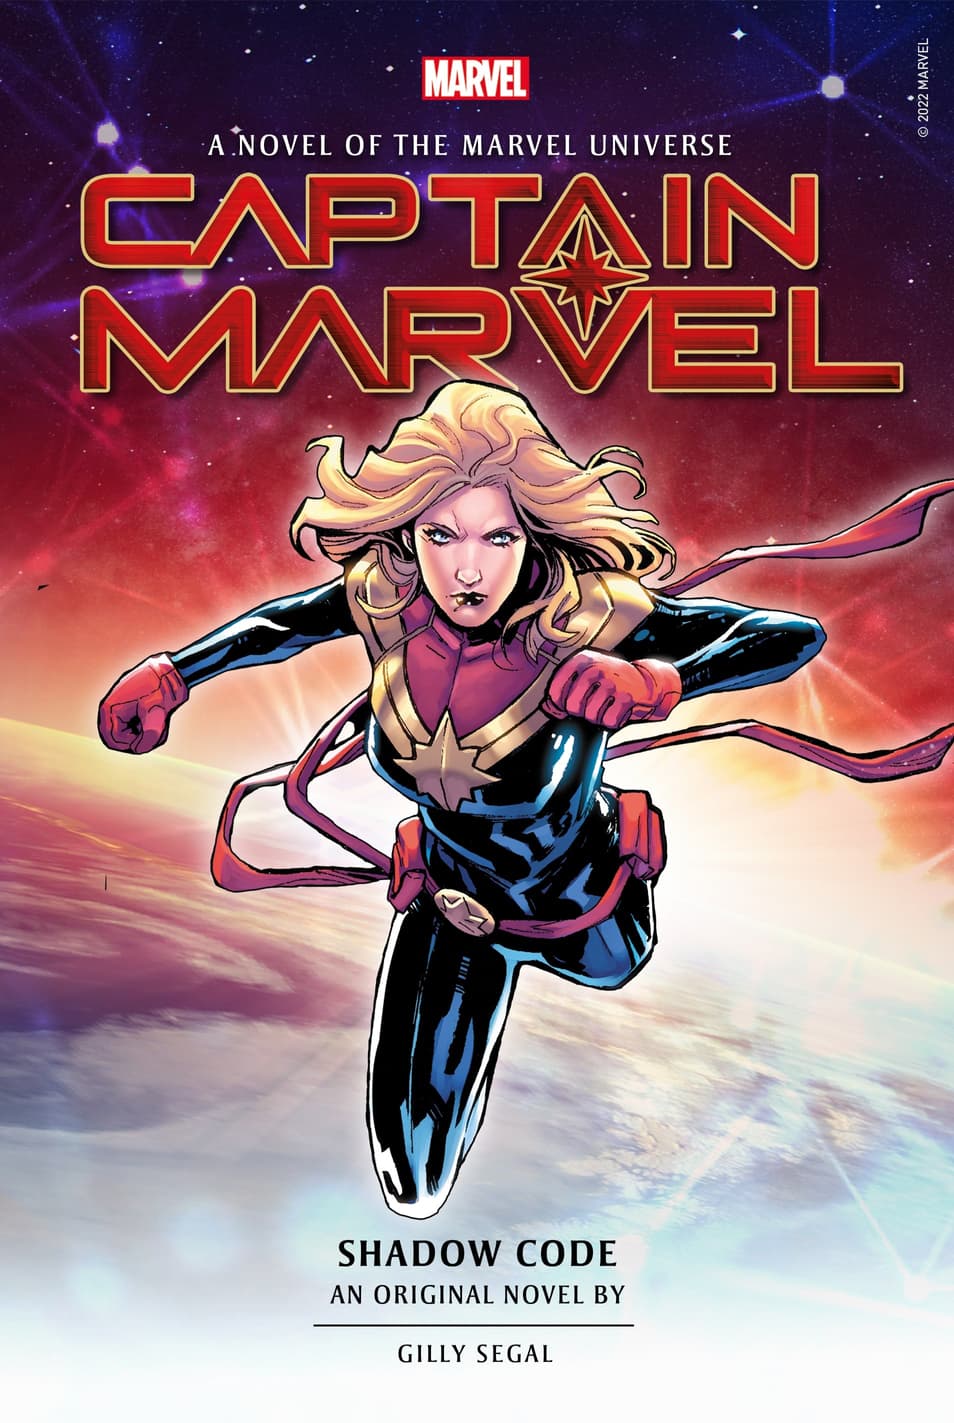 Cover to Captain Marvel: Shadow Code by Valerio Schiti and Rachelle Rosenberg.